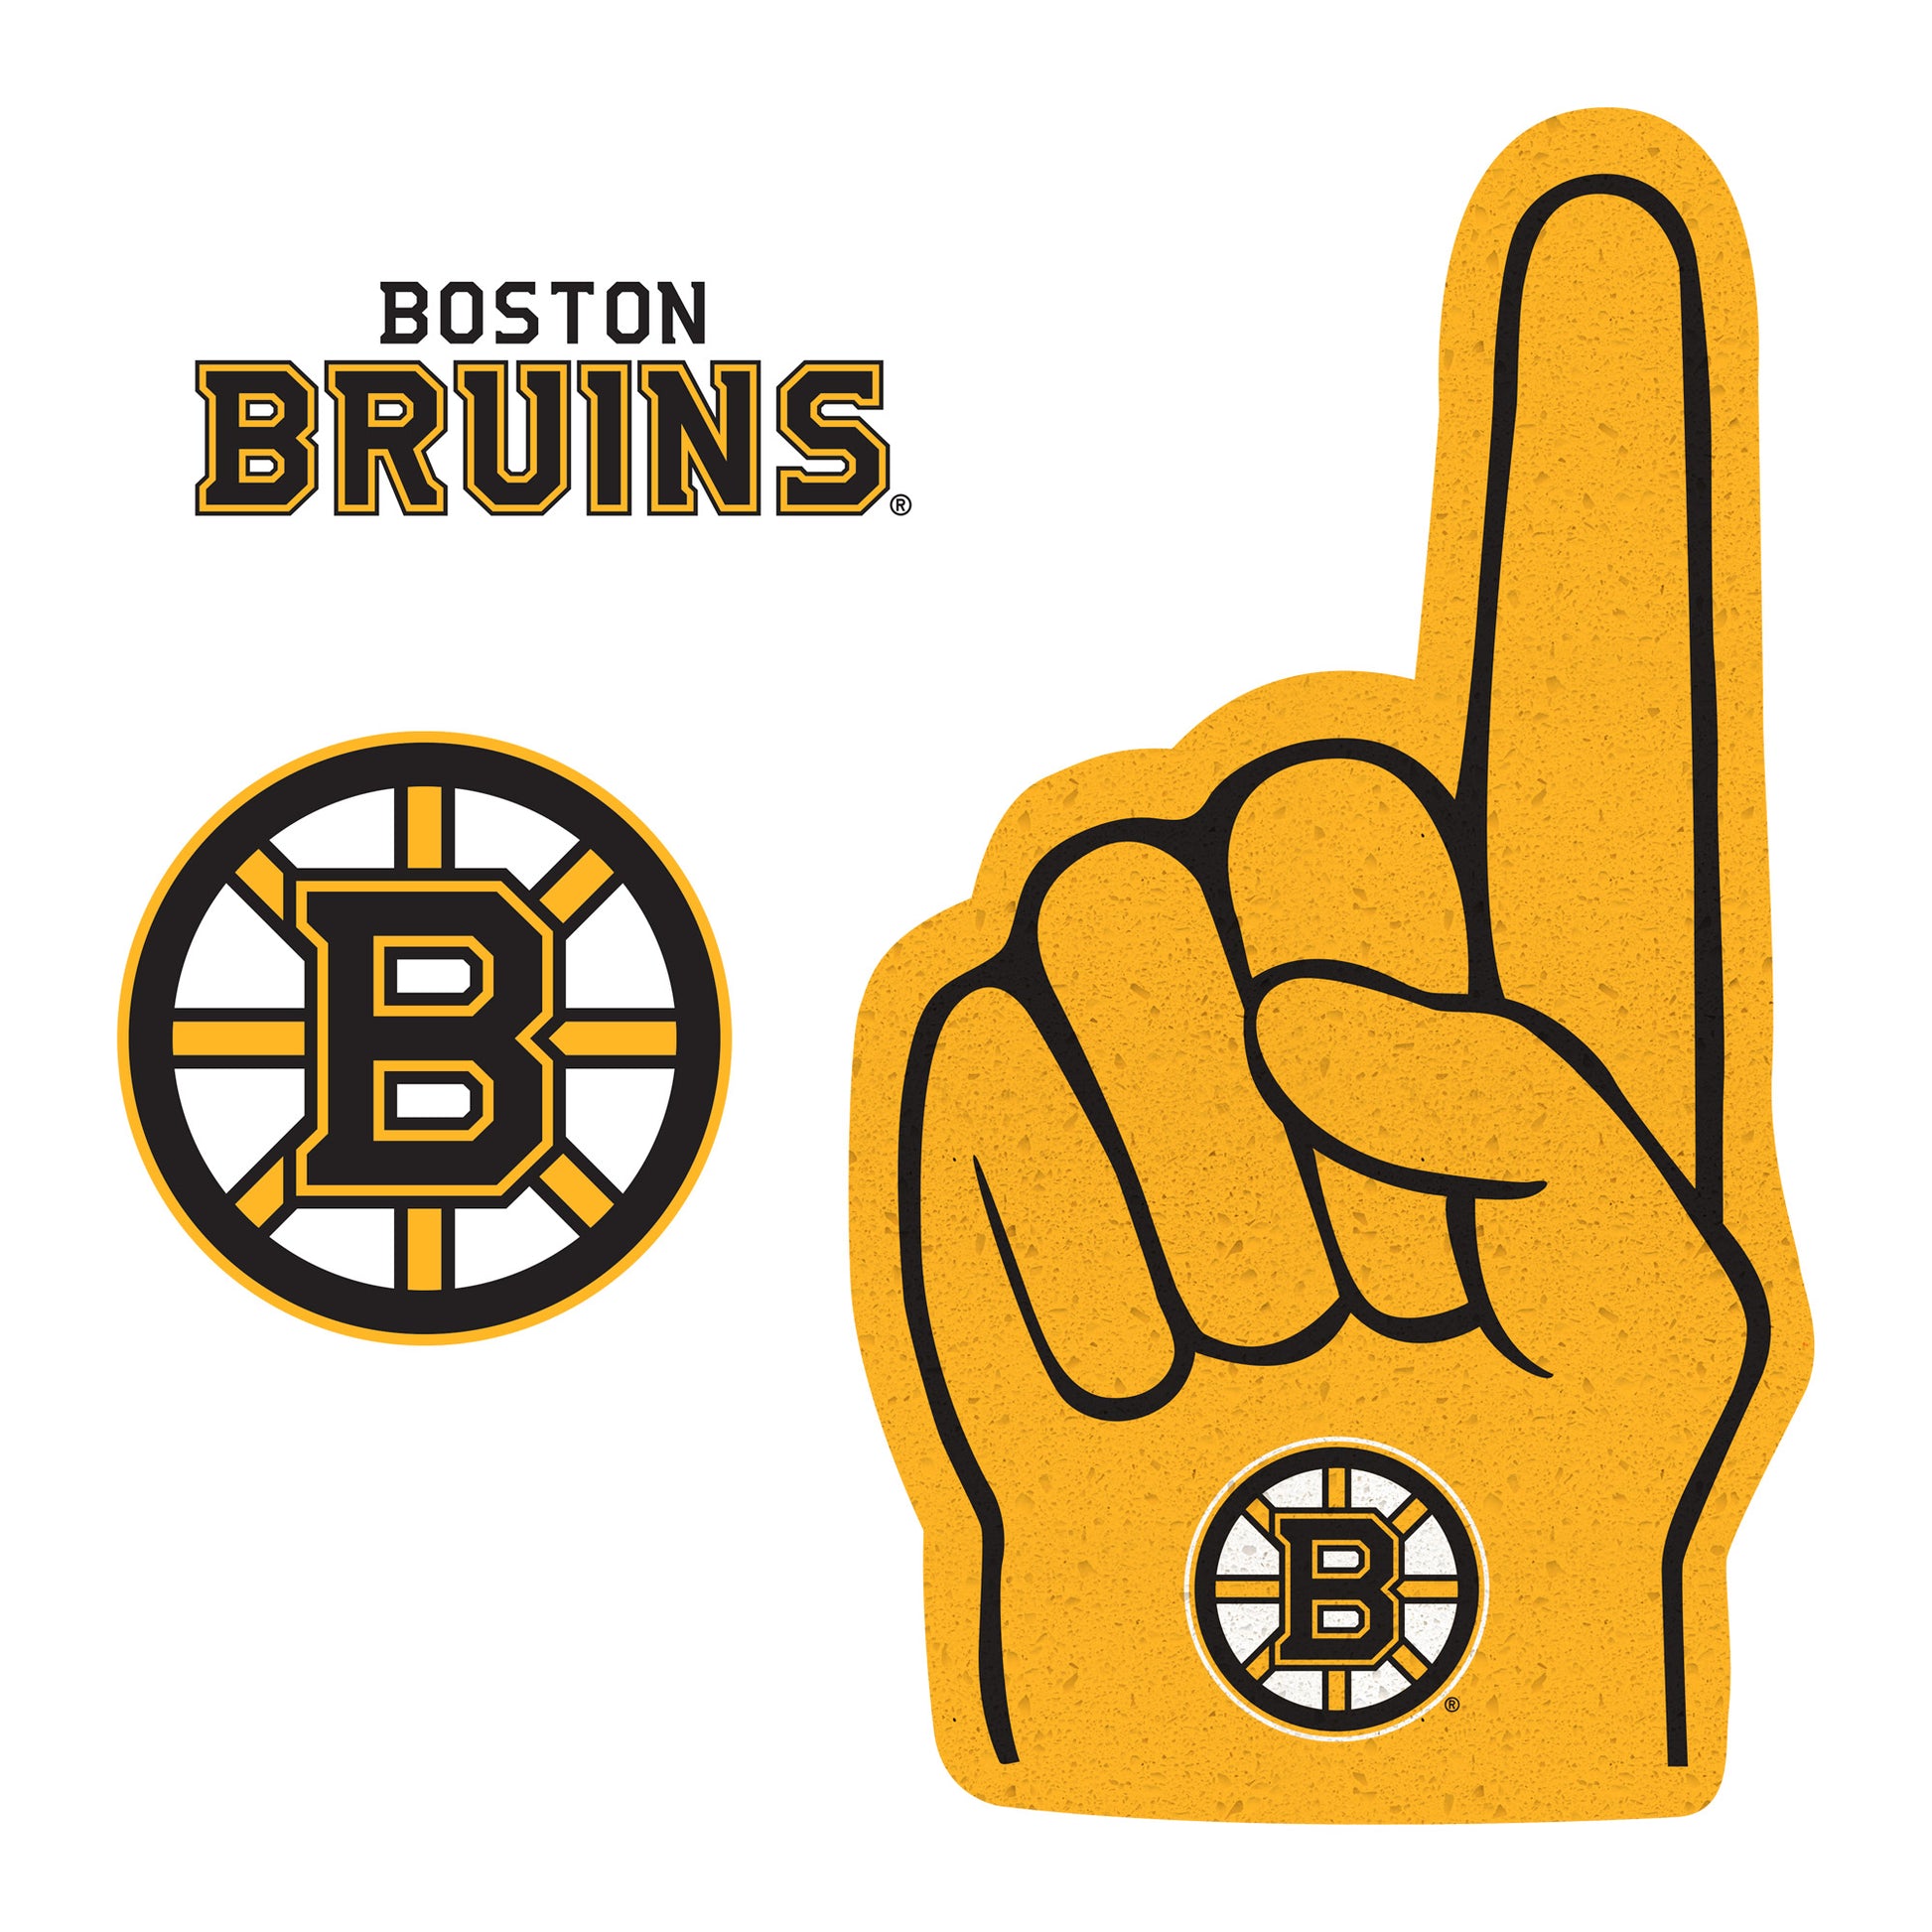 Boston Bruins: 2022 Outdoor Logo - Officially Licensed NHL Outdoor